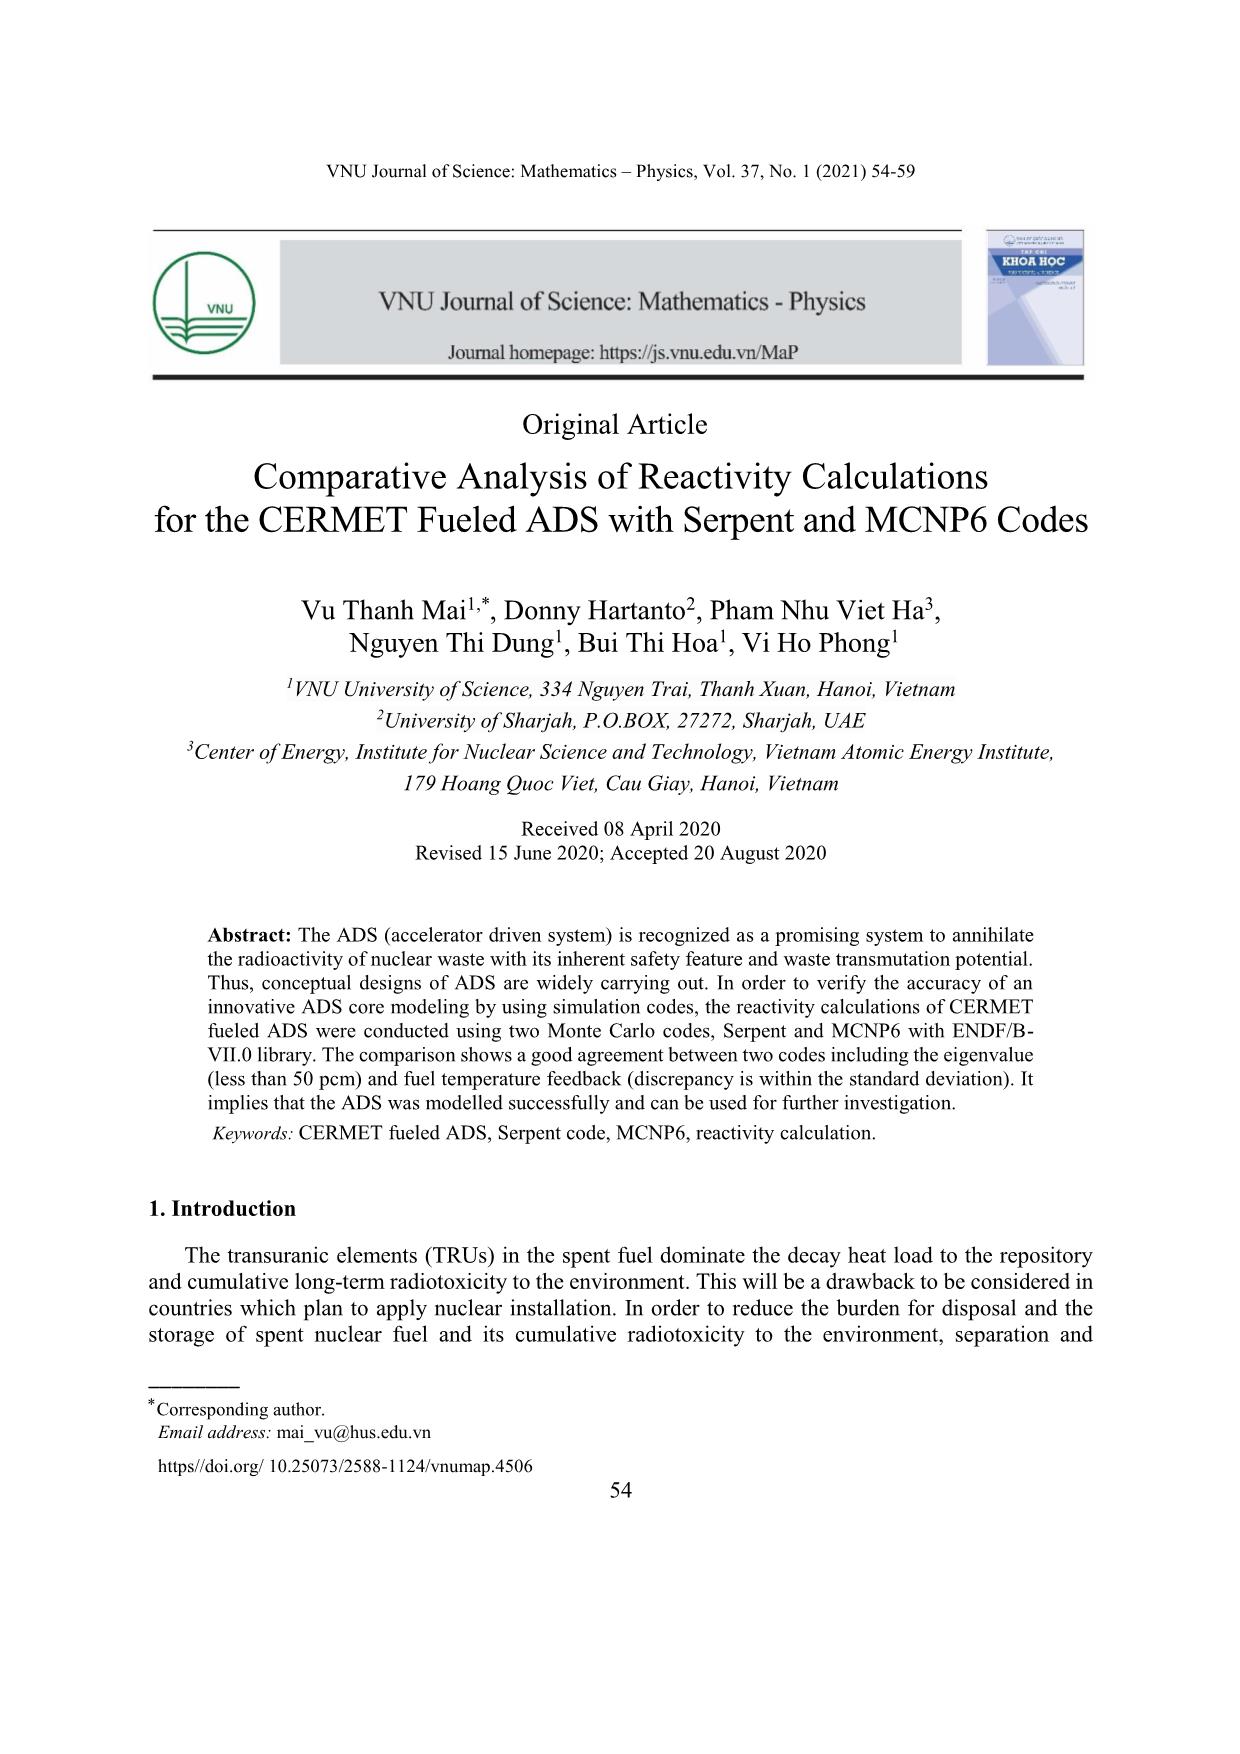 Comparative Analysis of Reactivity Calculations for the CERMET Fueled ADS with Serpent and MCNP6 Codes trang 1